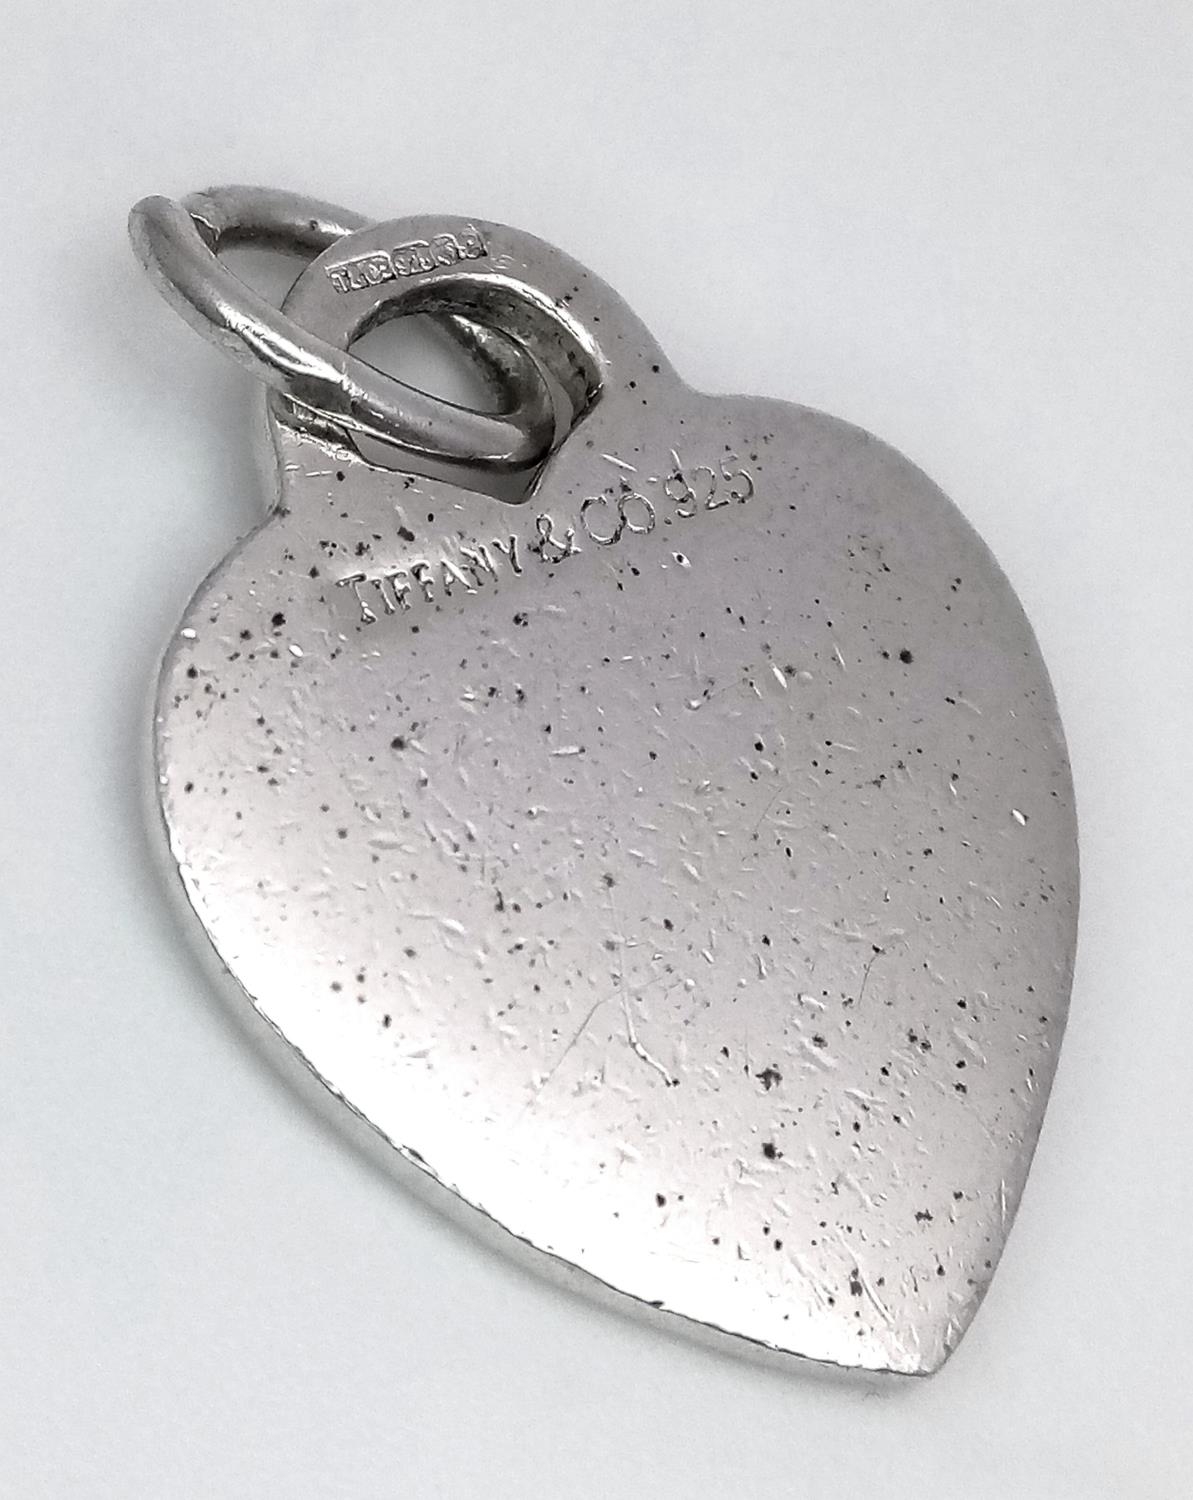 A TIFFANY & CO STERLING SILVER HEART PENDANT 7.1G , 30mm x 19mm. SC 9084 - Image 2 of 4